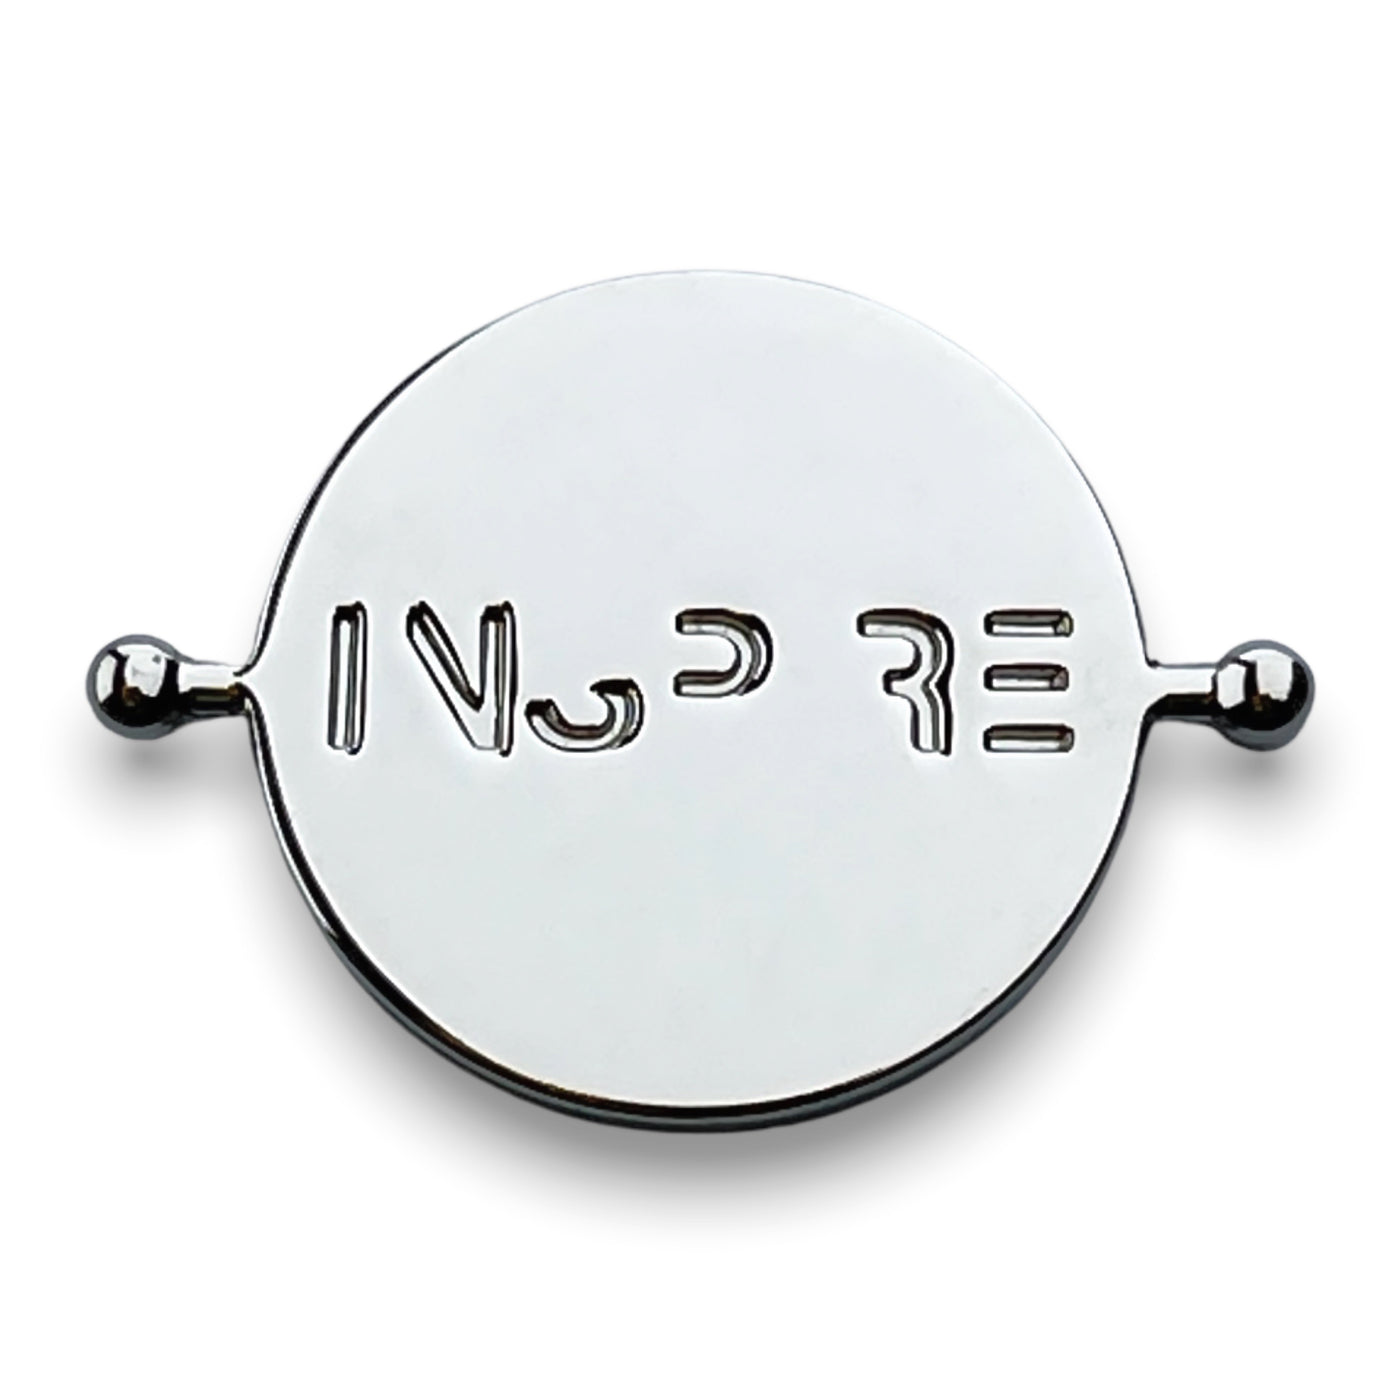 INSPIRE Element (spin to reveal)